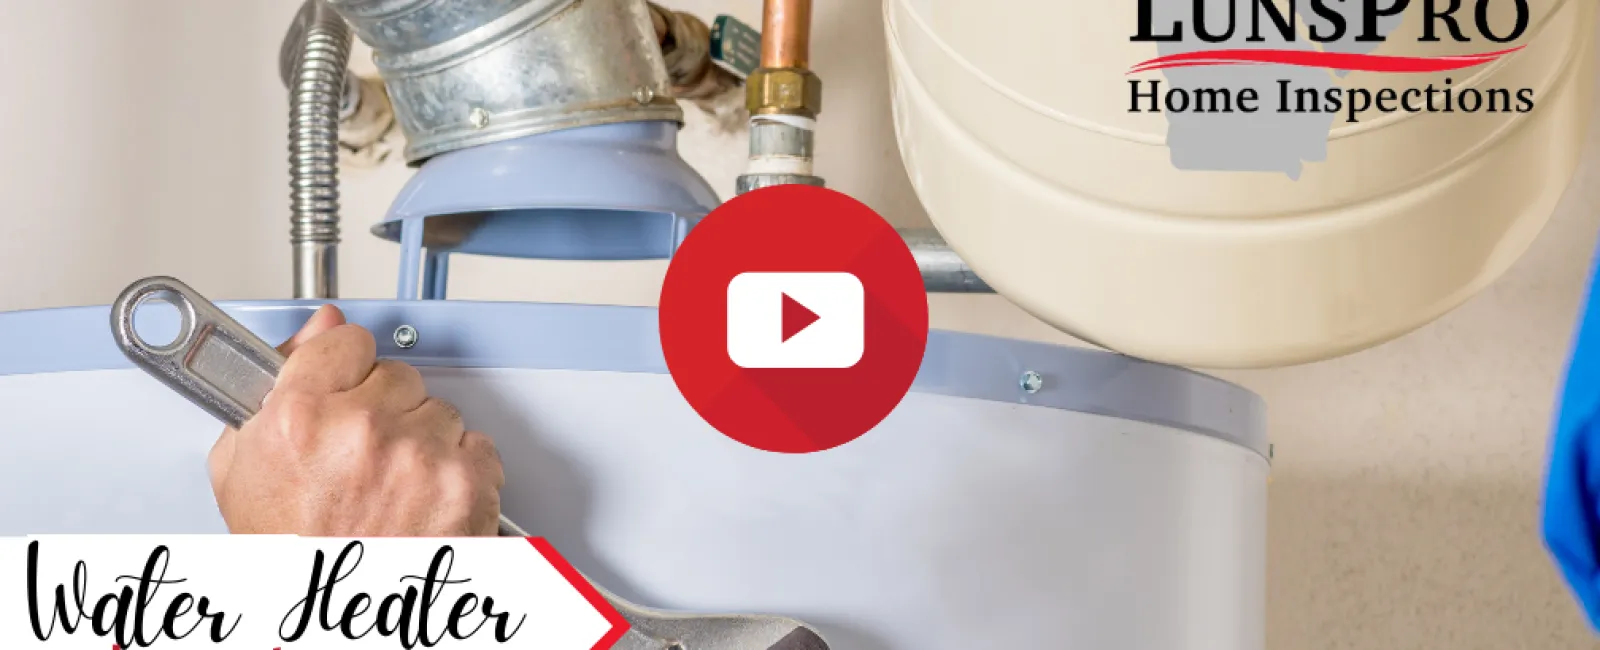 Water Heater Importance